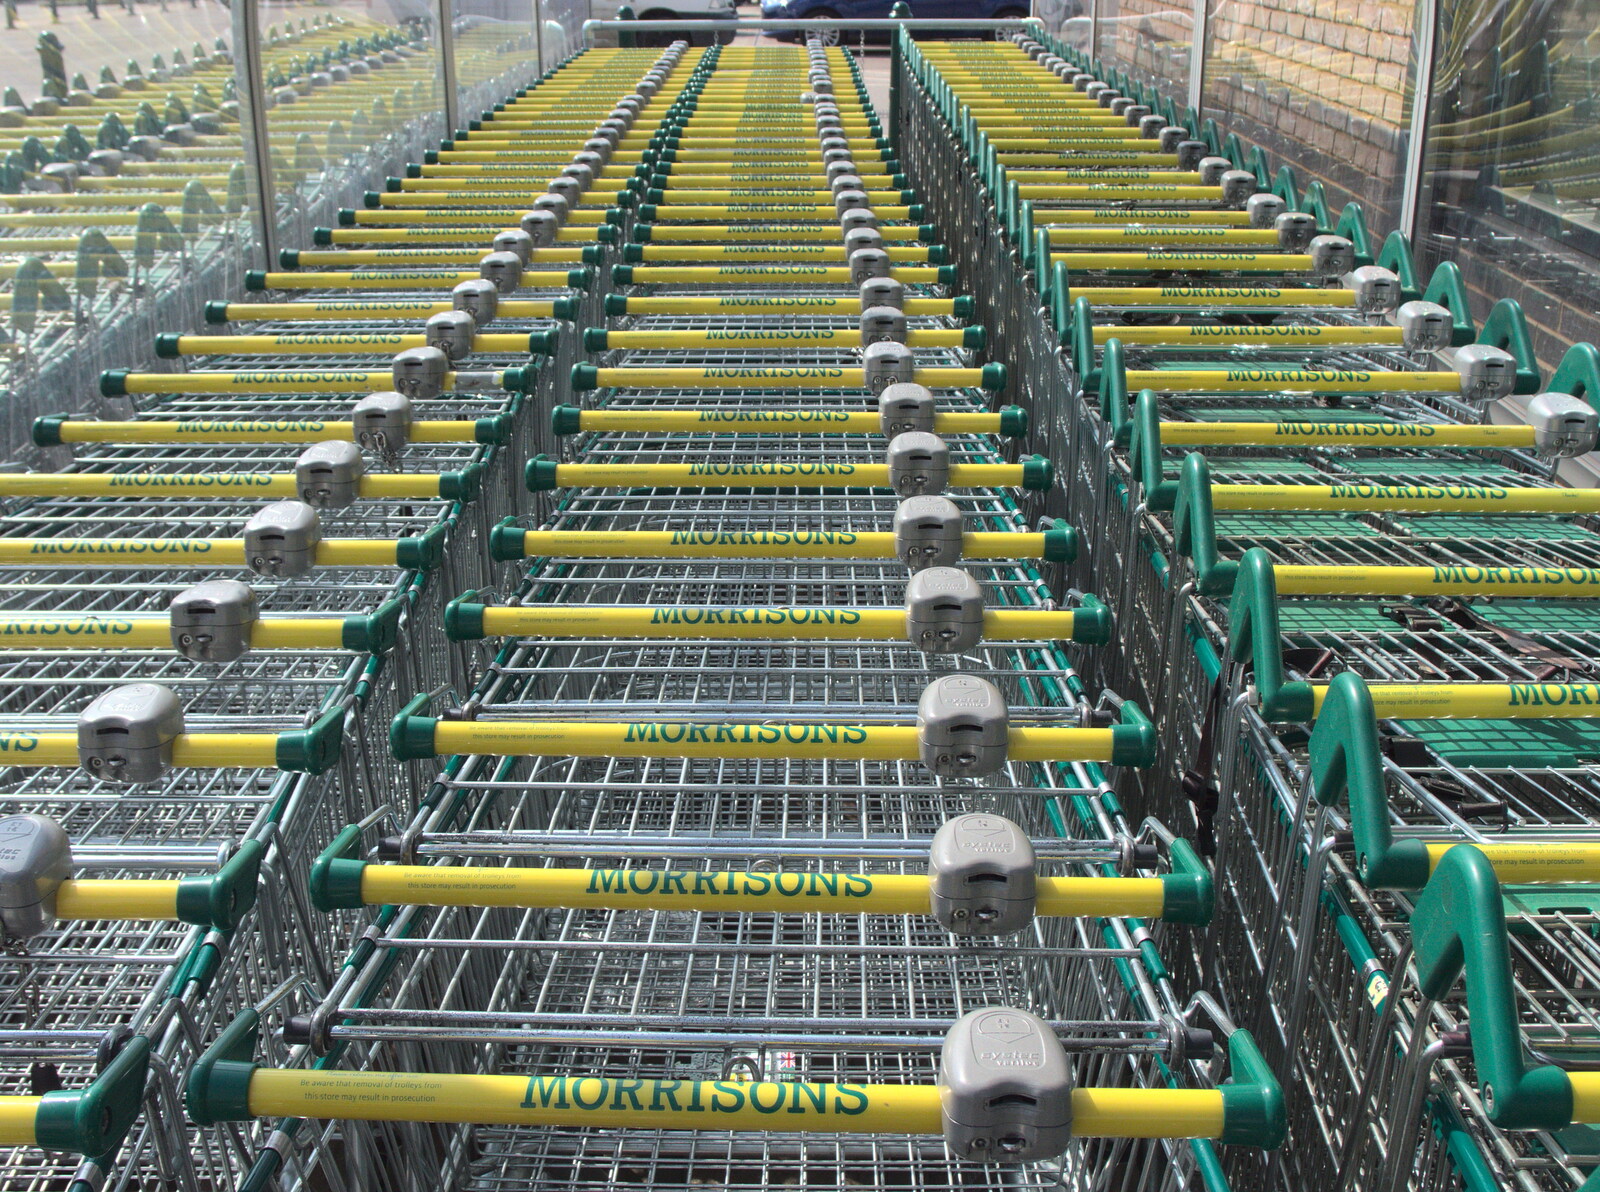 A load of trollies at Morrisons in Diss from The East Anglian Beer Festival, Bury St. Edmunds, Suffolk - 21st April 2018